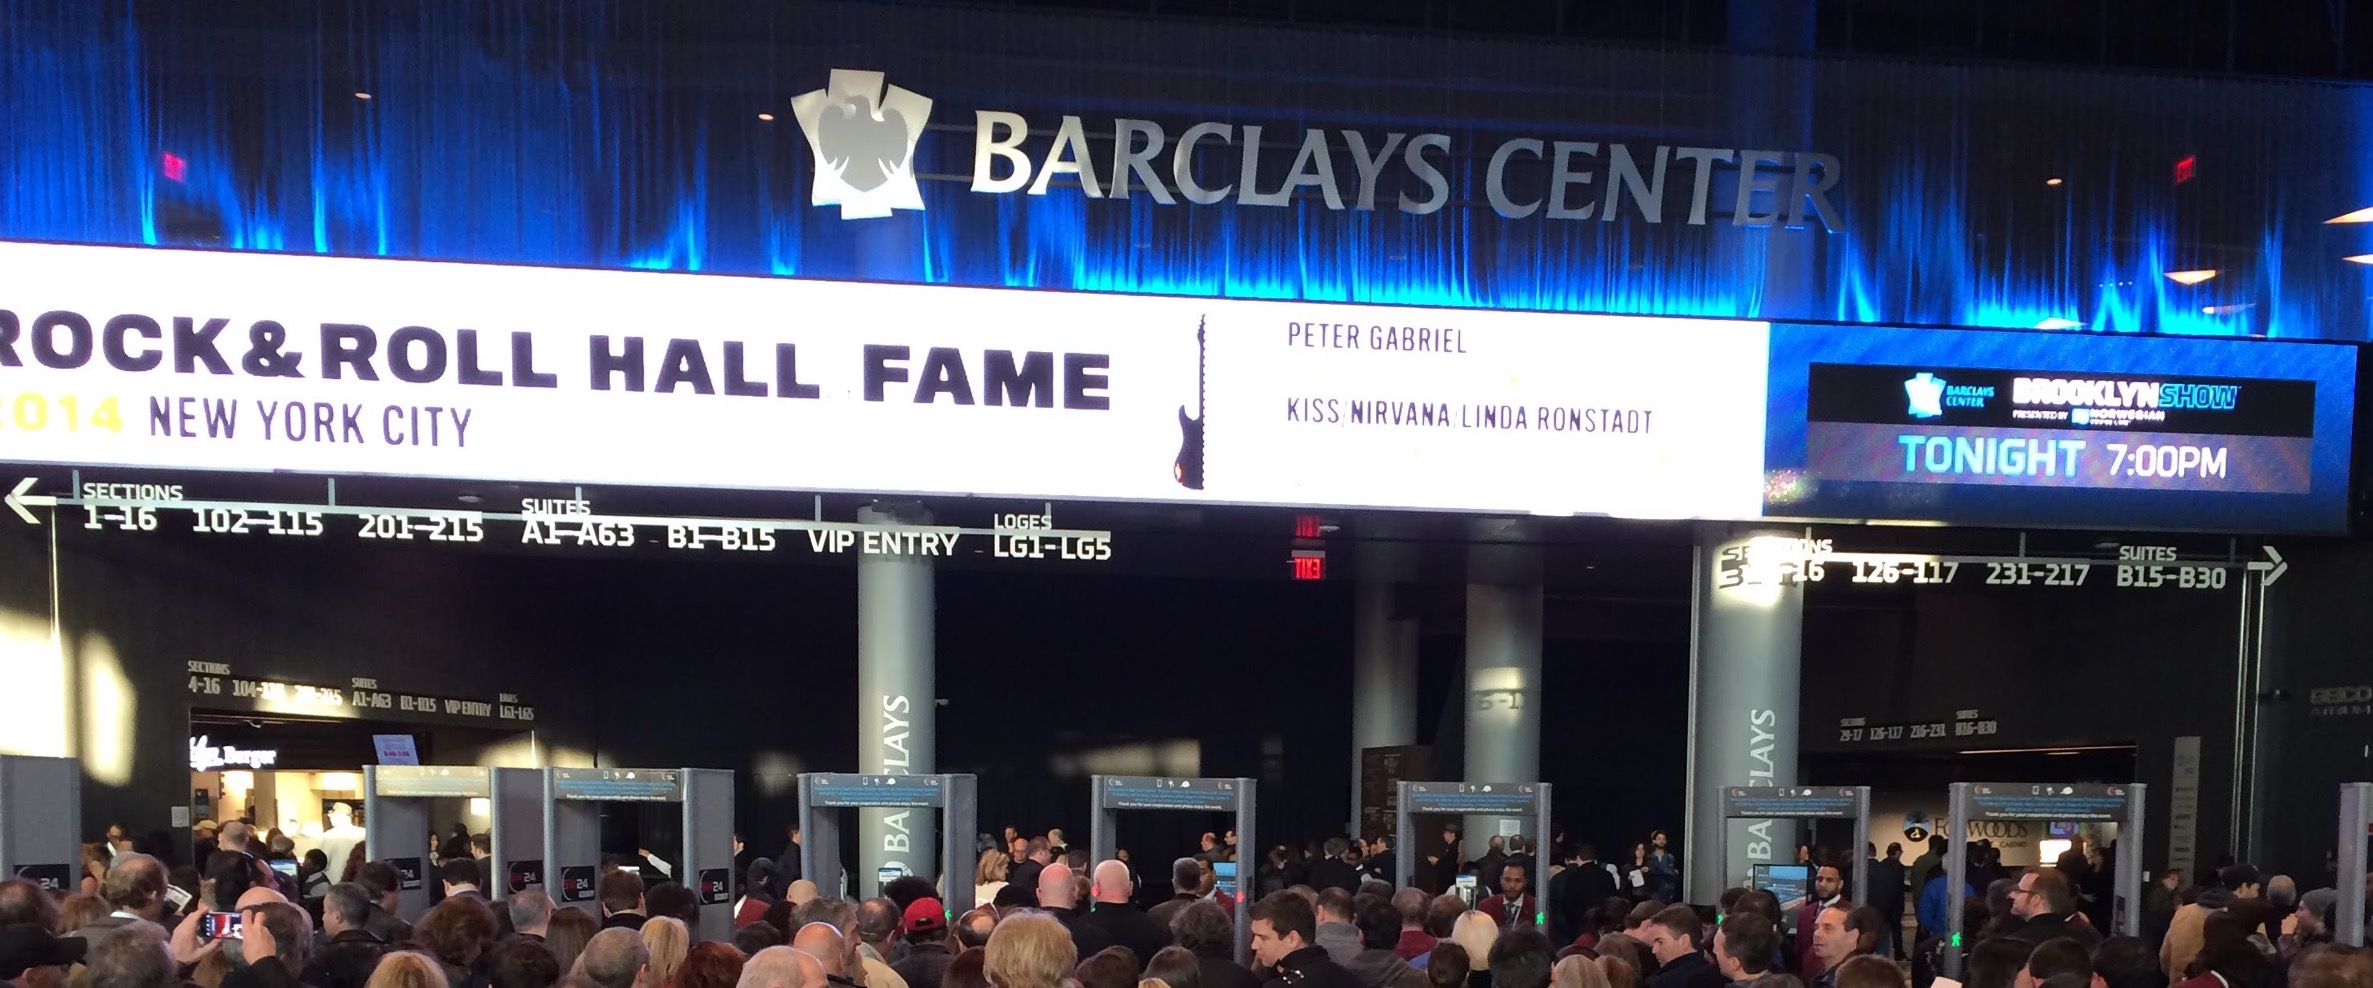 2023 Rock and Roll Hall of Fame inductions held in New York